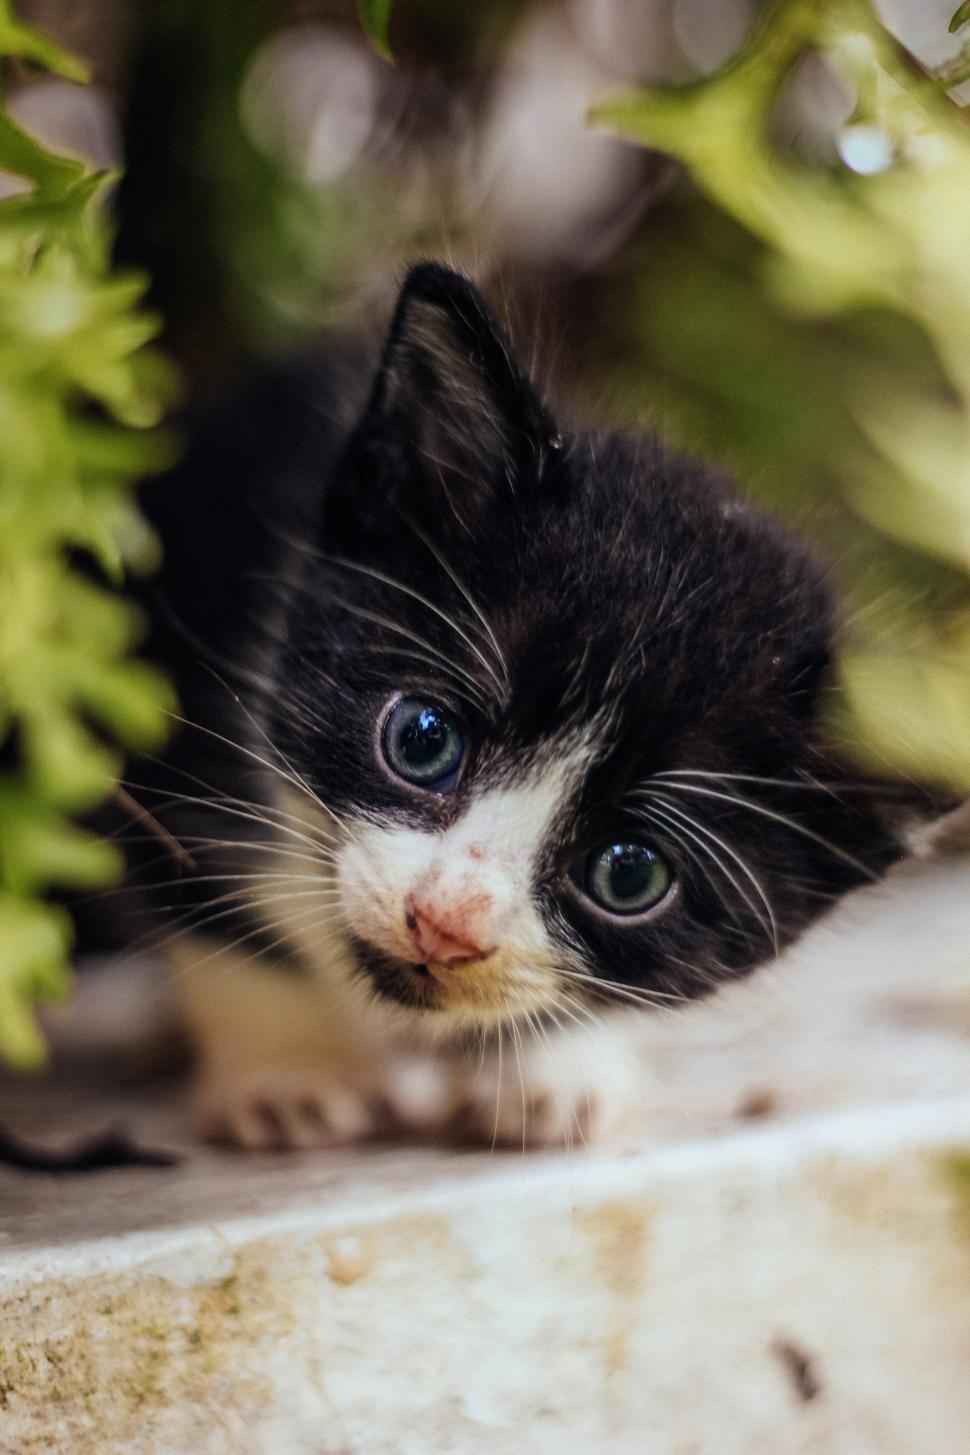 Free Image of Curious cat in the garden 